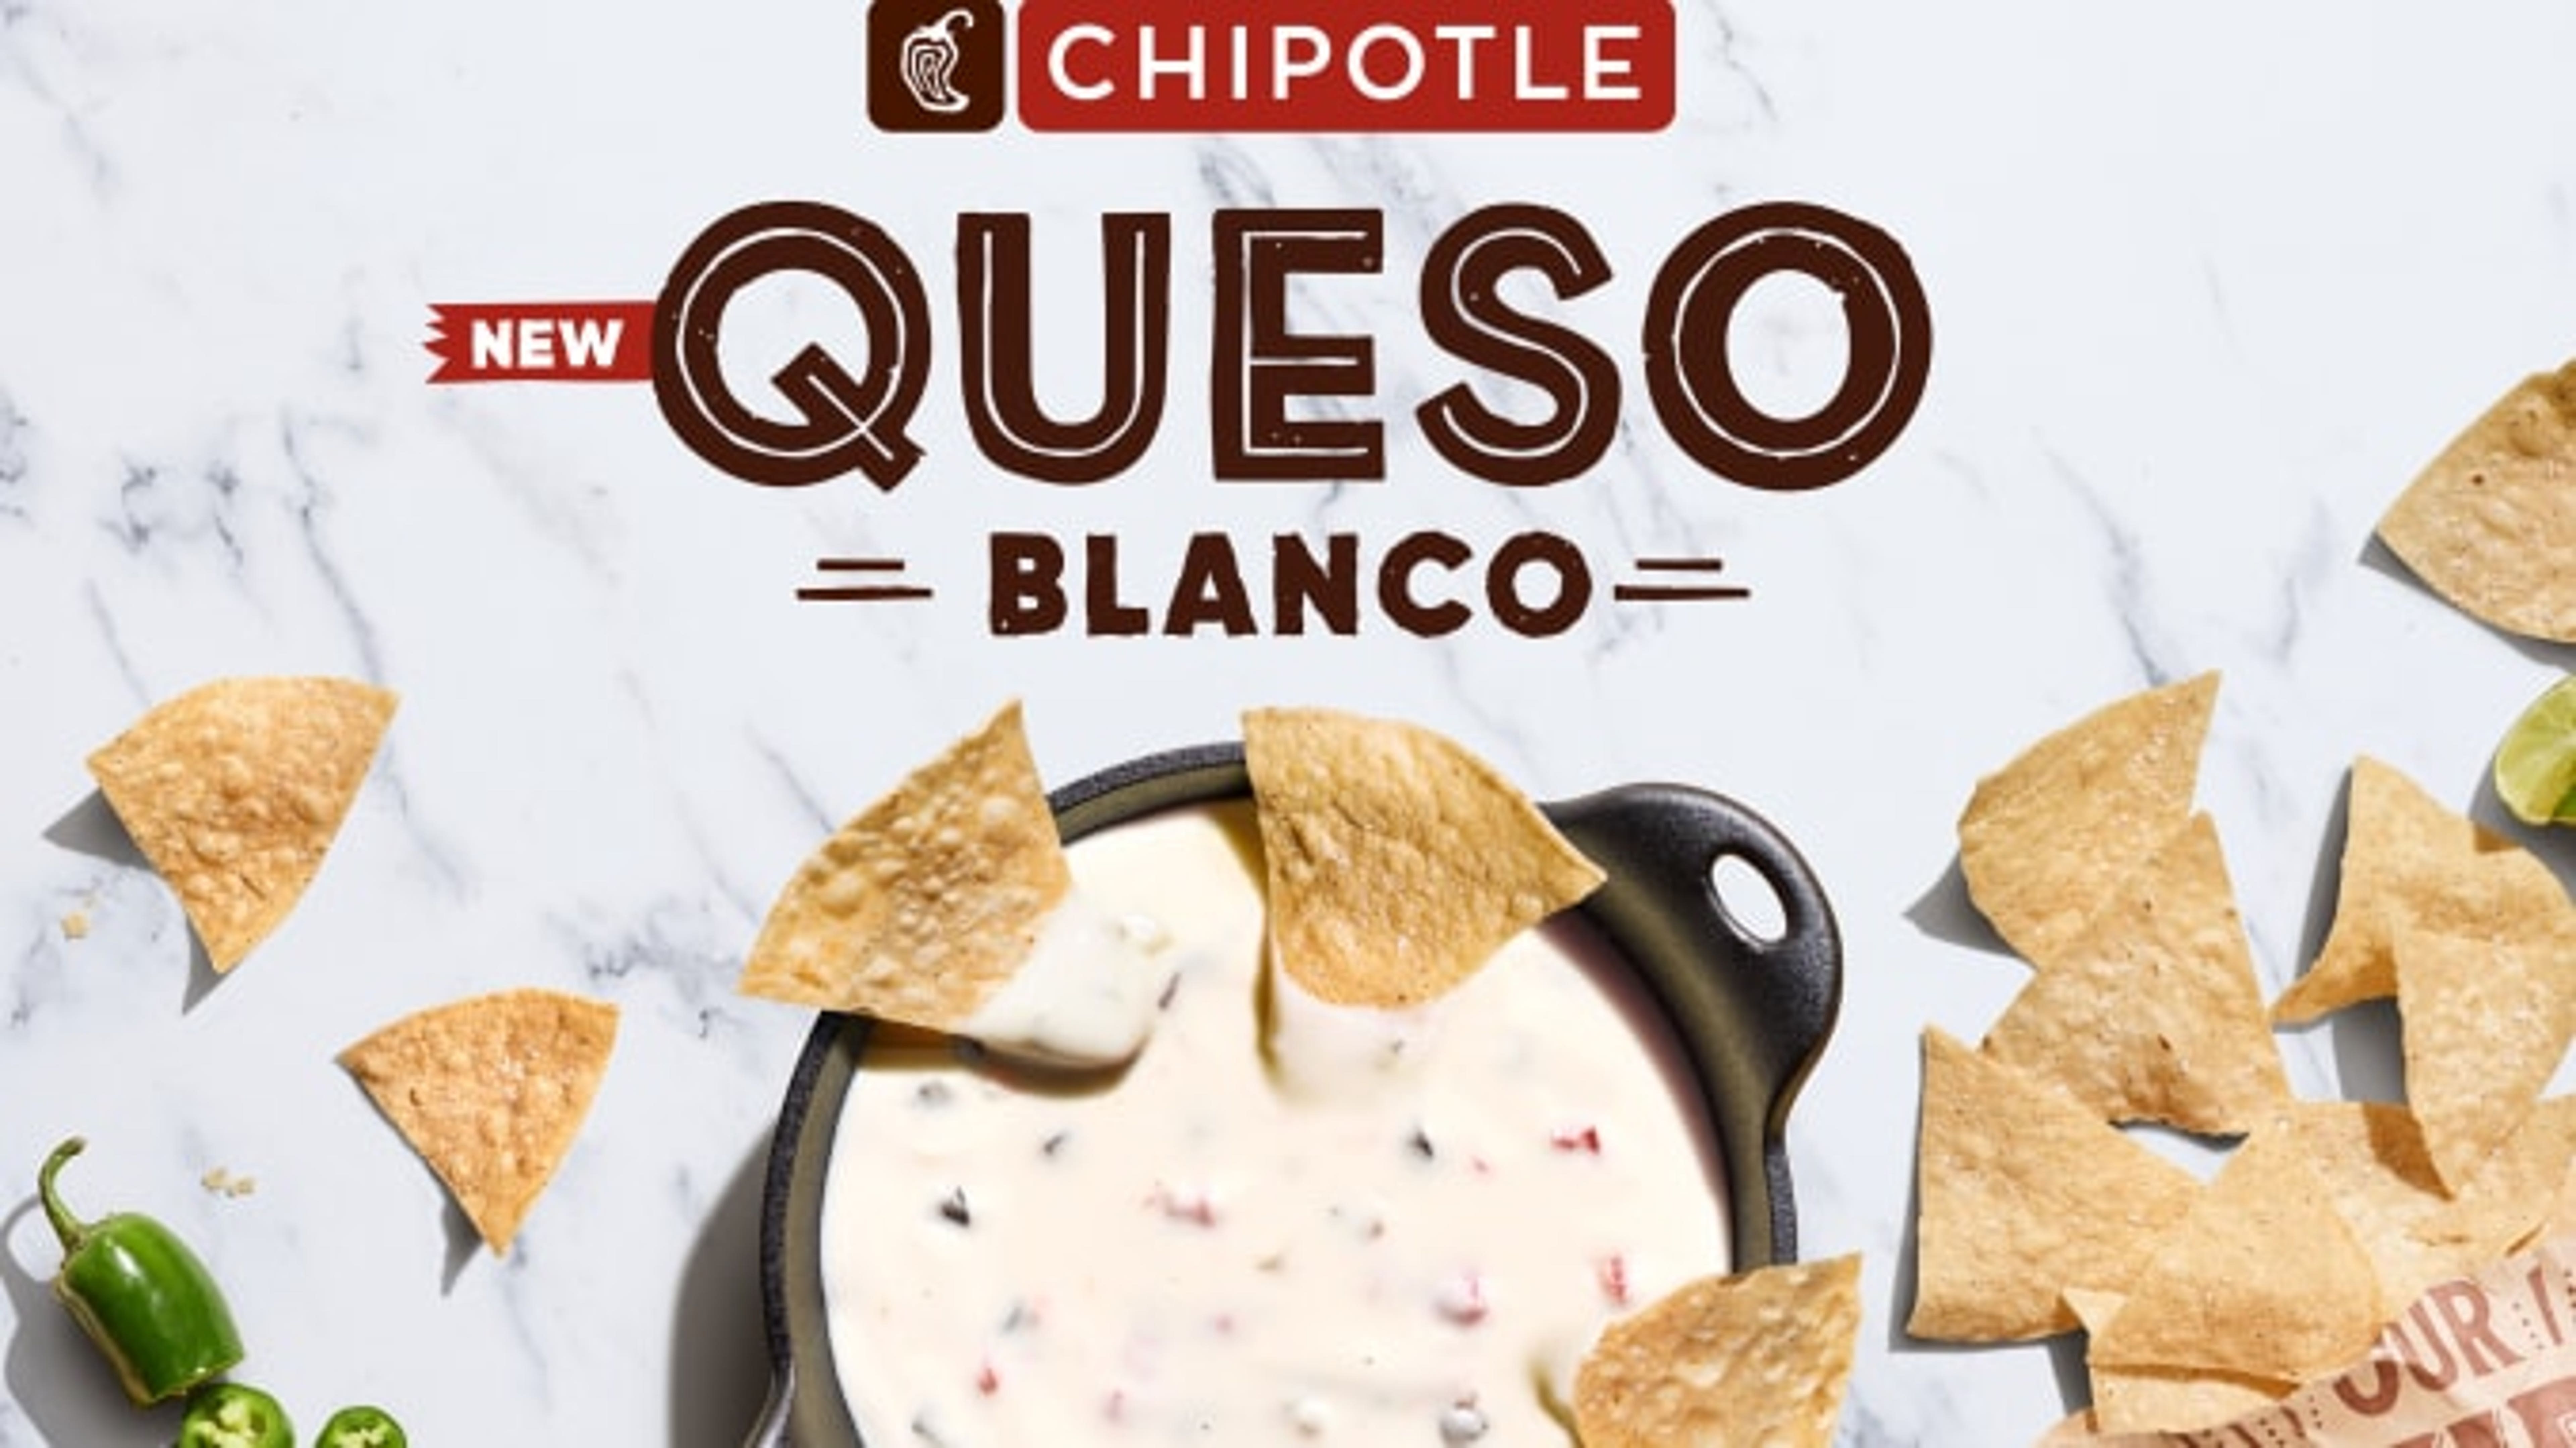 Chipotle Ditches Old Queso Blanco For New Recipe